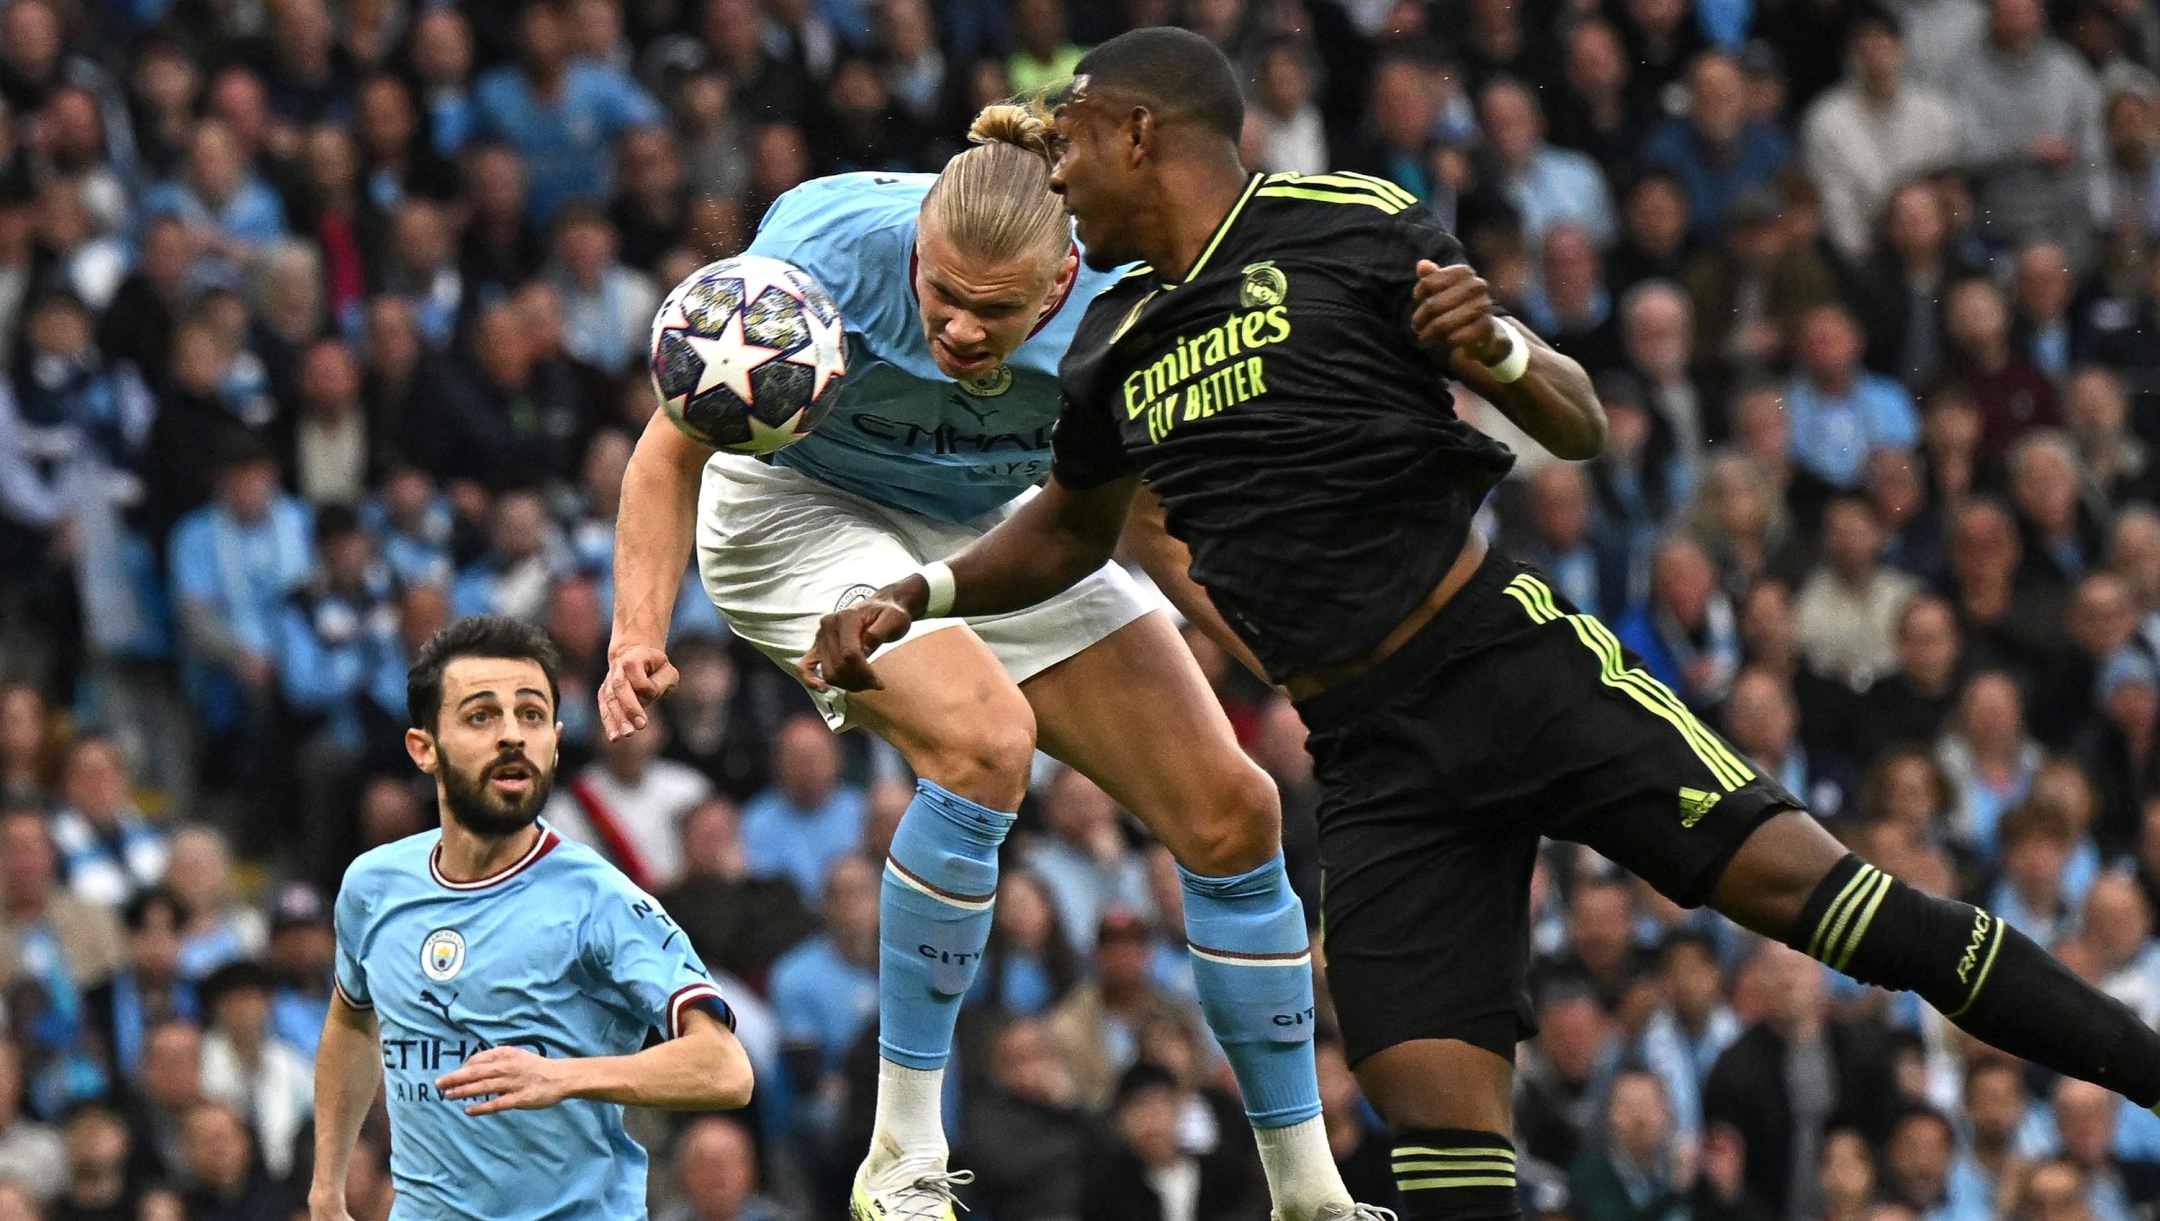 Manchester City's Norwegian striker Erling Haaland (C) headers toward goal but has his shot saved during the UEFA Champions League second leg semi-final football match between Manchester City and Real Madrid at the Etihad Stadium in Manchester, north west England, on May 17, 2023. (Photo by Paul ELLIS / AFP)